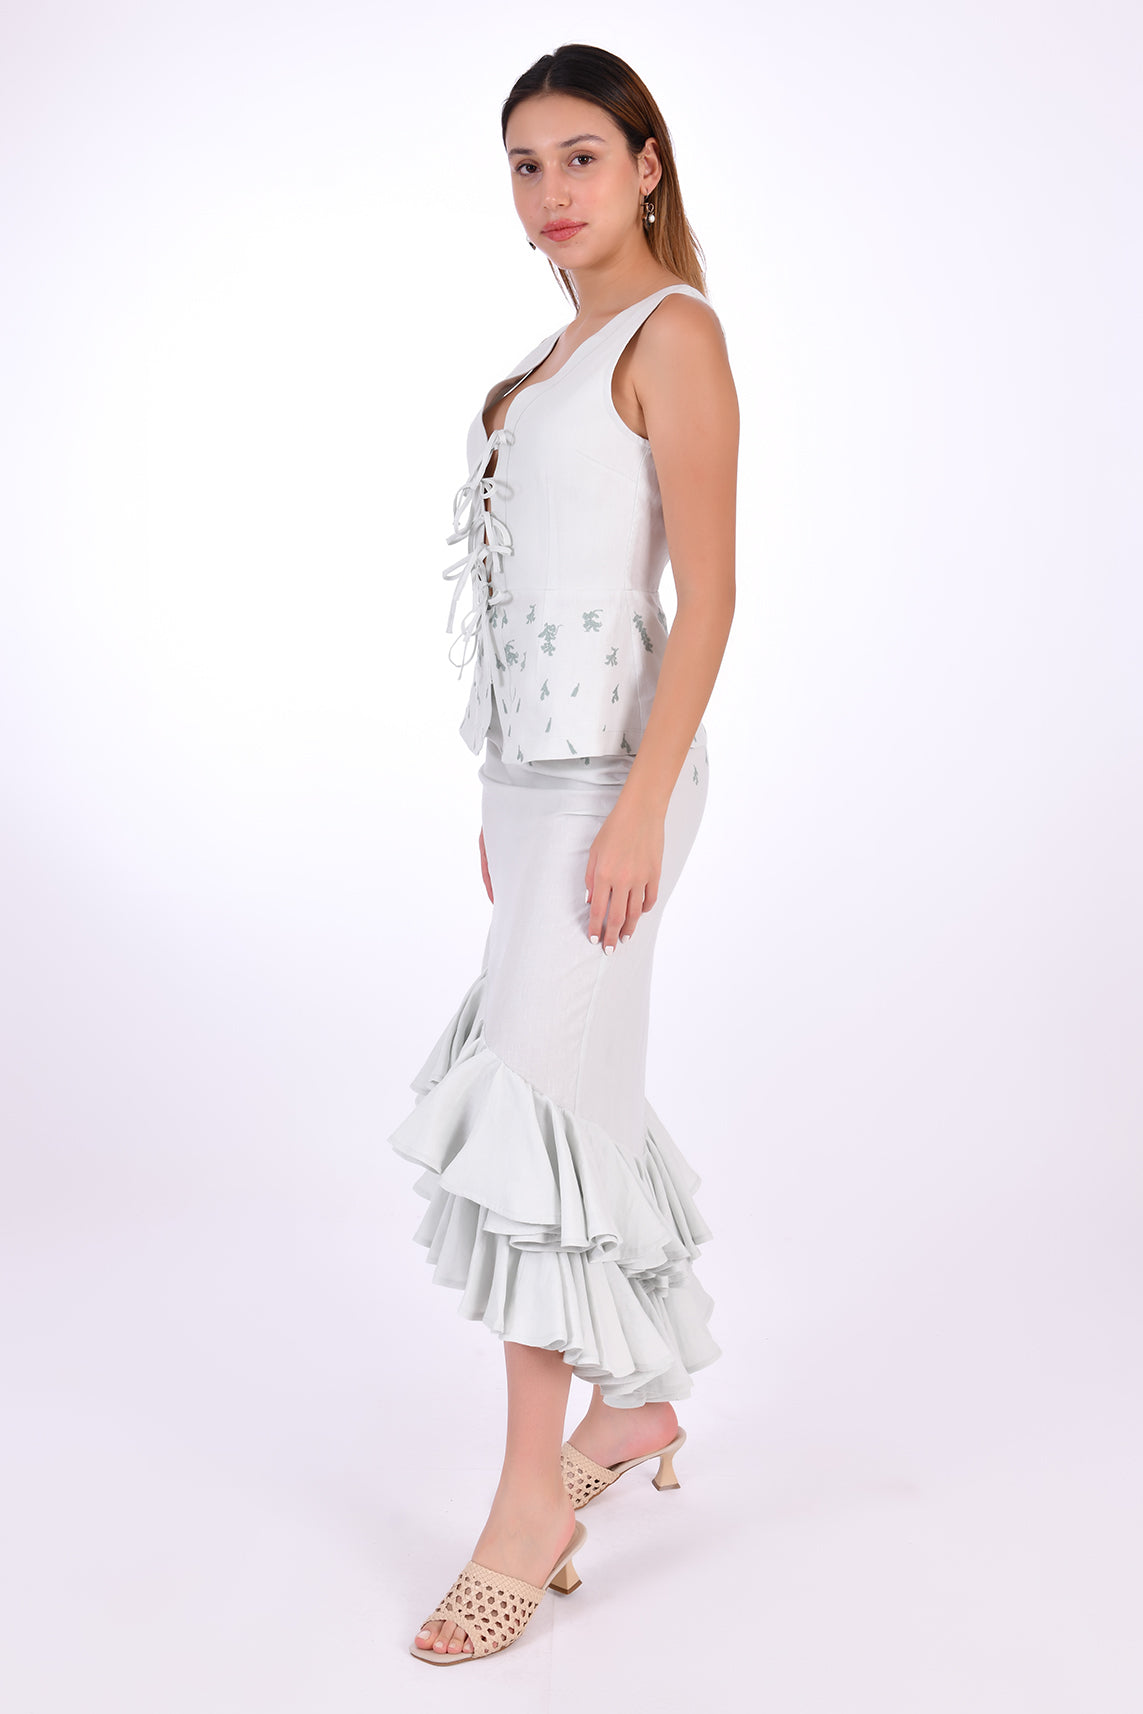 Fanm Mon Flamen Skirt Set, side view. 2 Piece Linen Top and Skirt Set includes a sleeveless top with a v-neck, a tie-up front, and a peplum flare bottom with delicate embroidery. The midi-length linen skirt is complemented by a gathered front detail and coordinating embroidery.